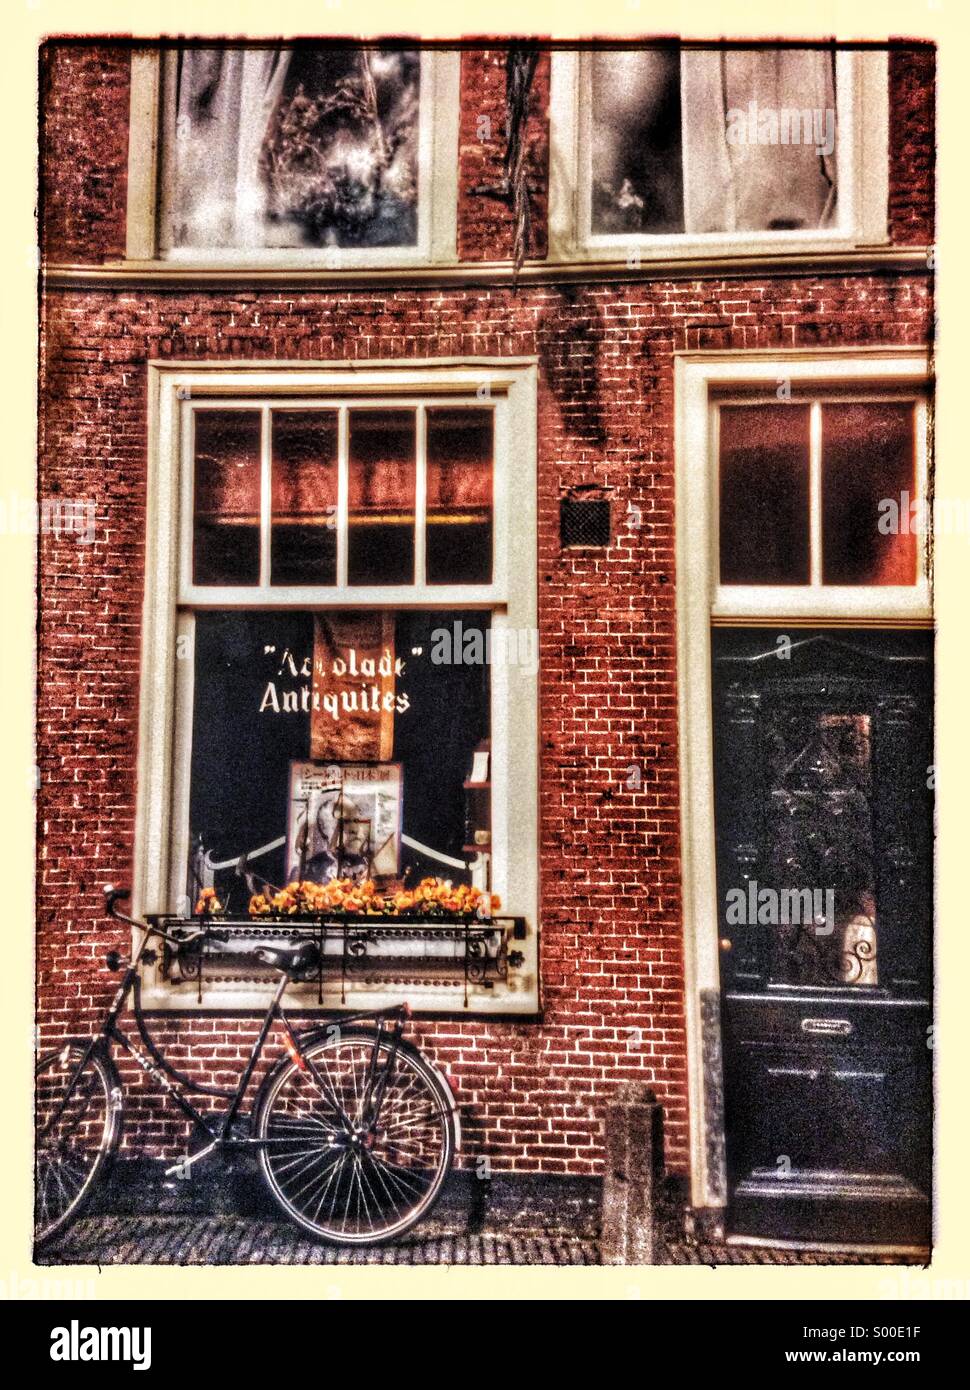 Old Antiques shop in Amsterdam, Netherlands Stock Photo